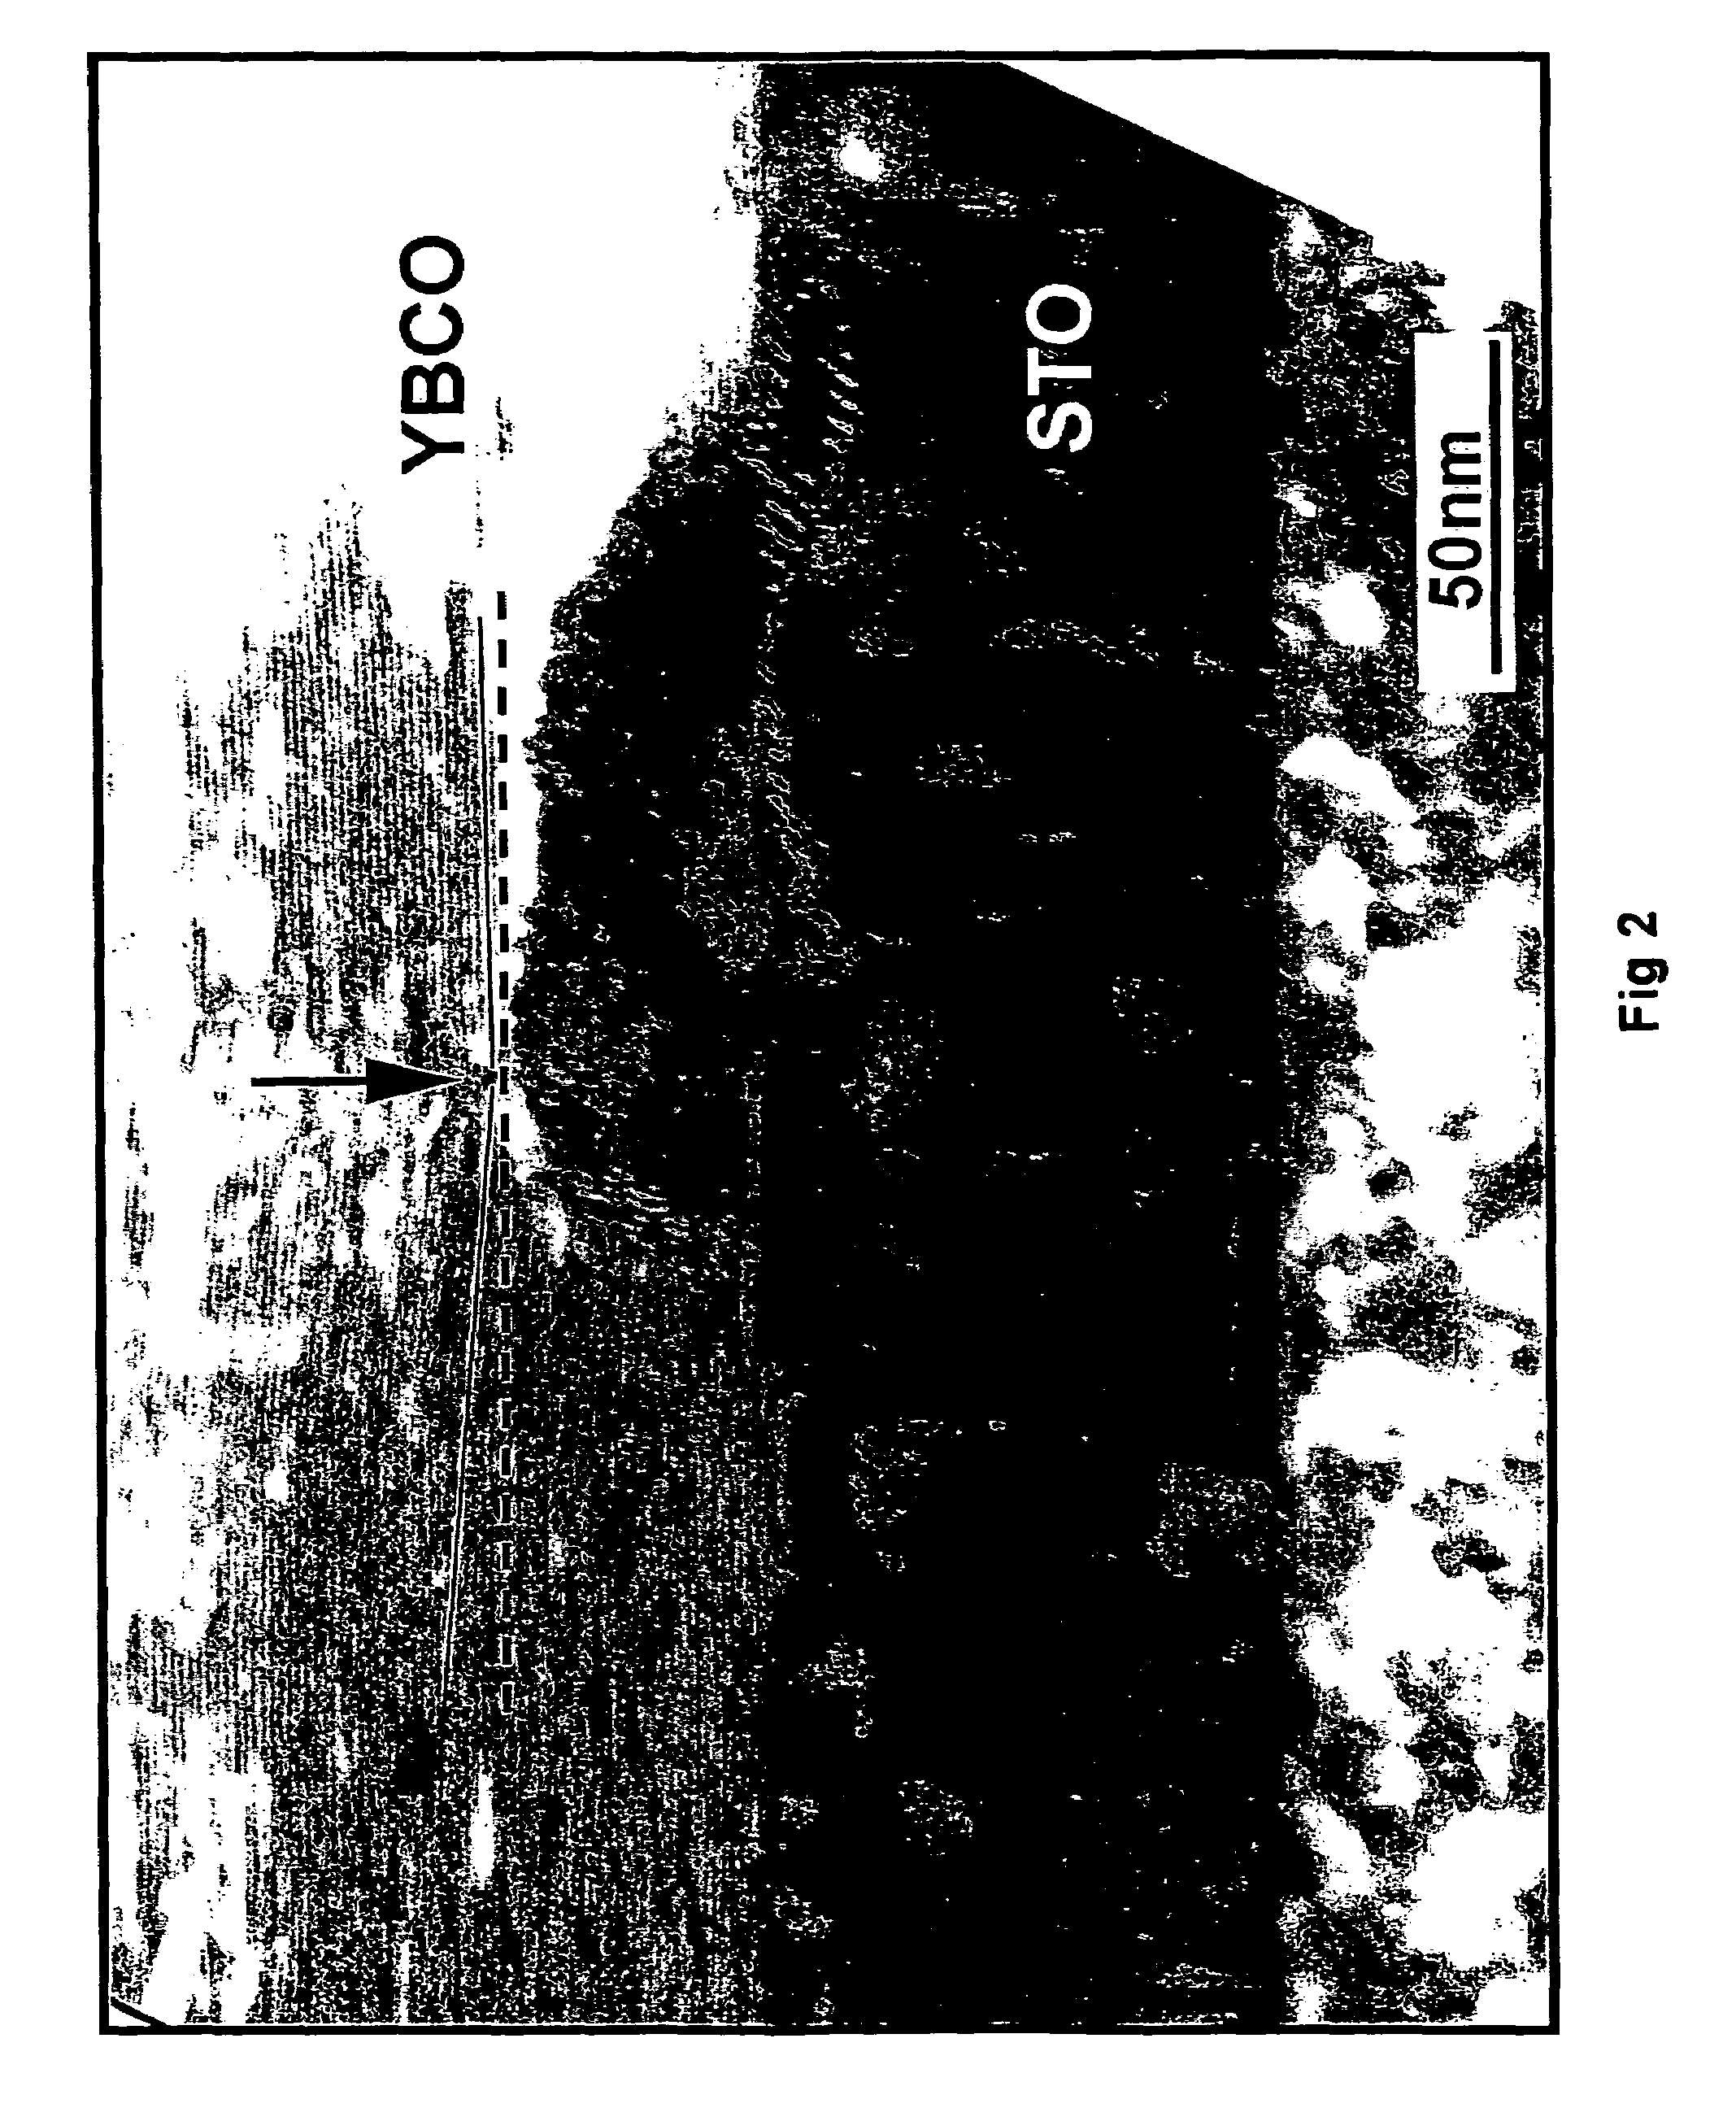 Method for improving performance of high temperature superconductors within a magnetic field